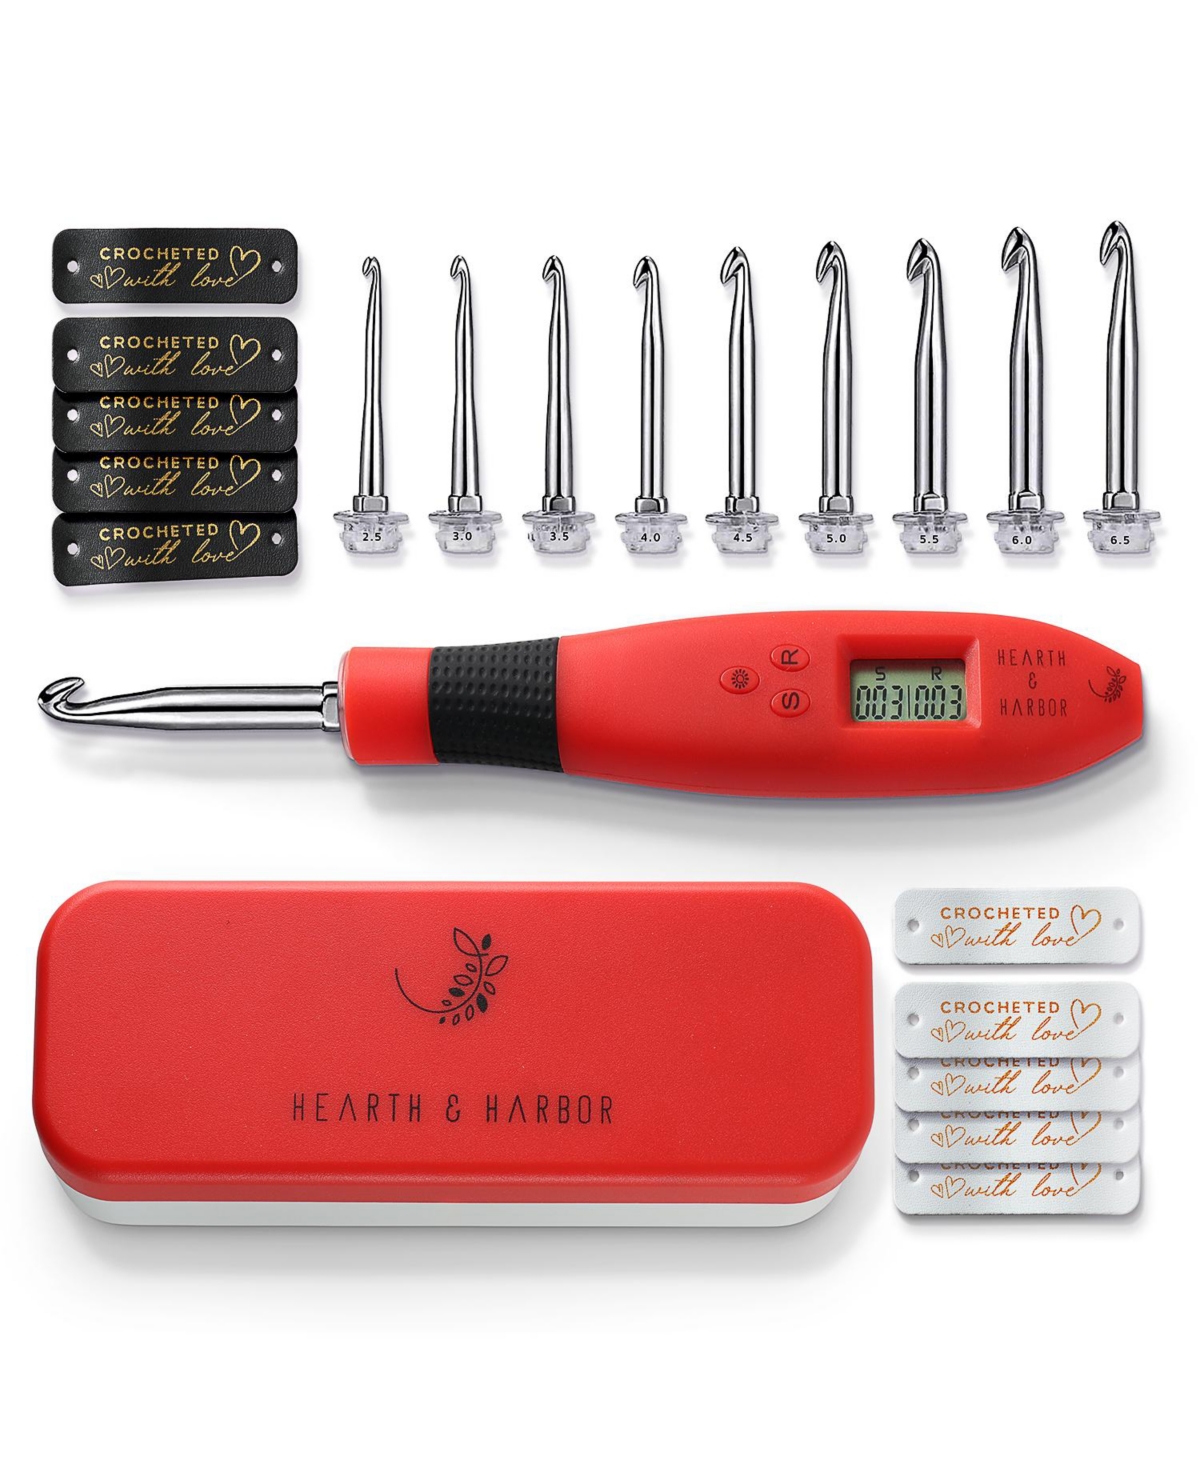 Digital Crochet Stitch and Row Counter Tool - Assorted Pre-pack